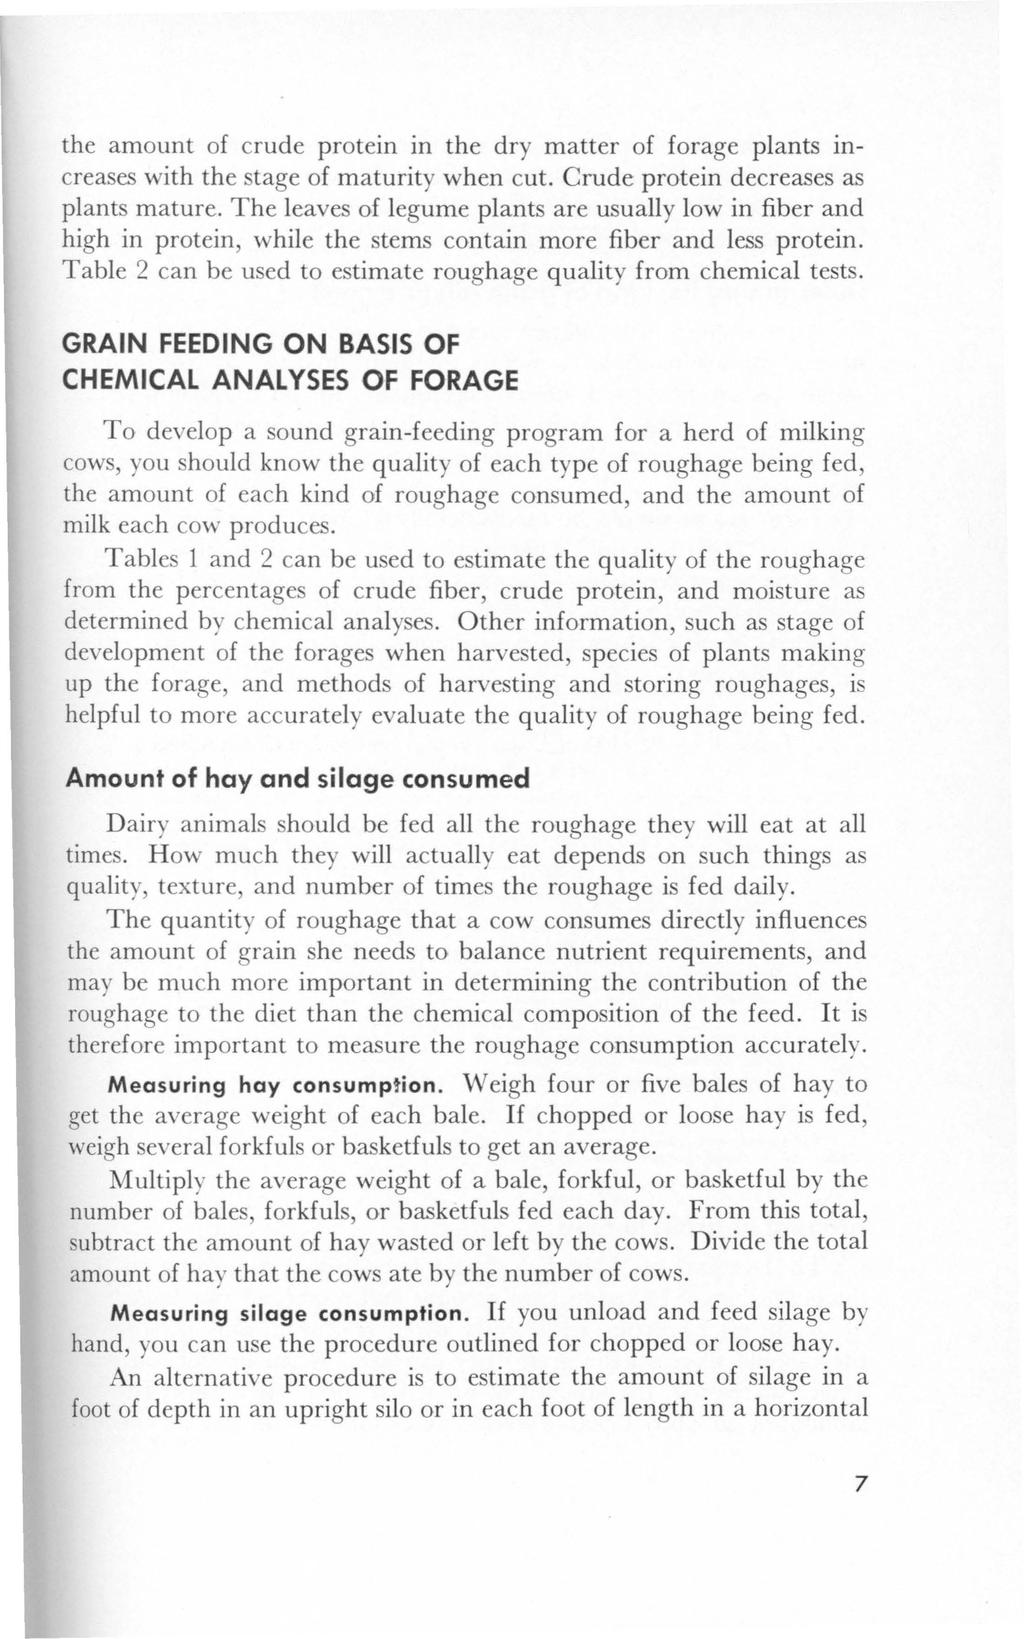 the amount of crude protein in the dry matter of forage plants increases with the stage of maturity when cut. Crude protein decreases as plants mature.